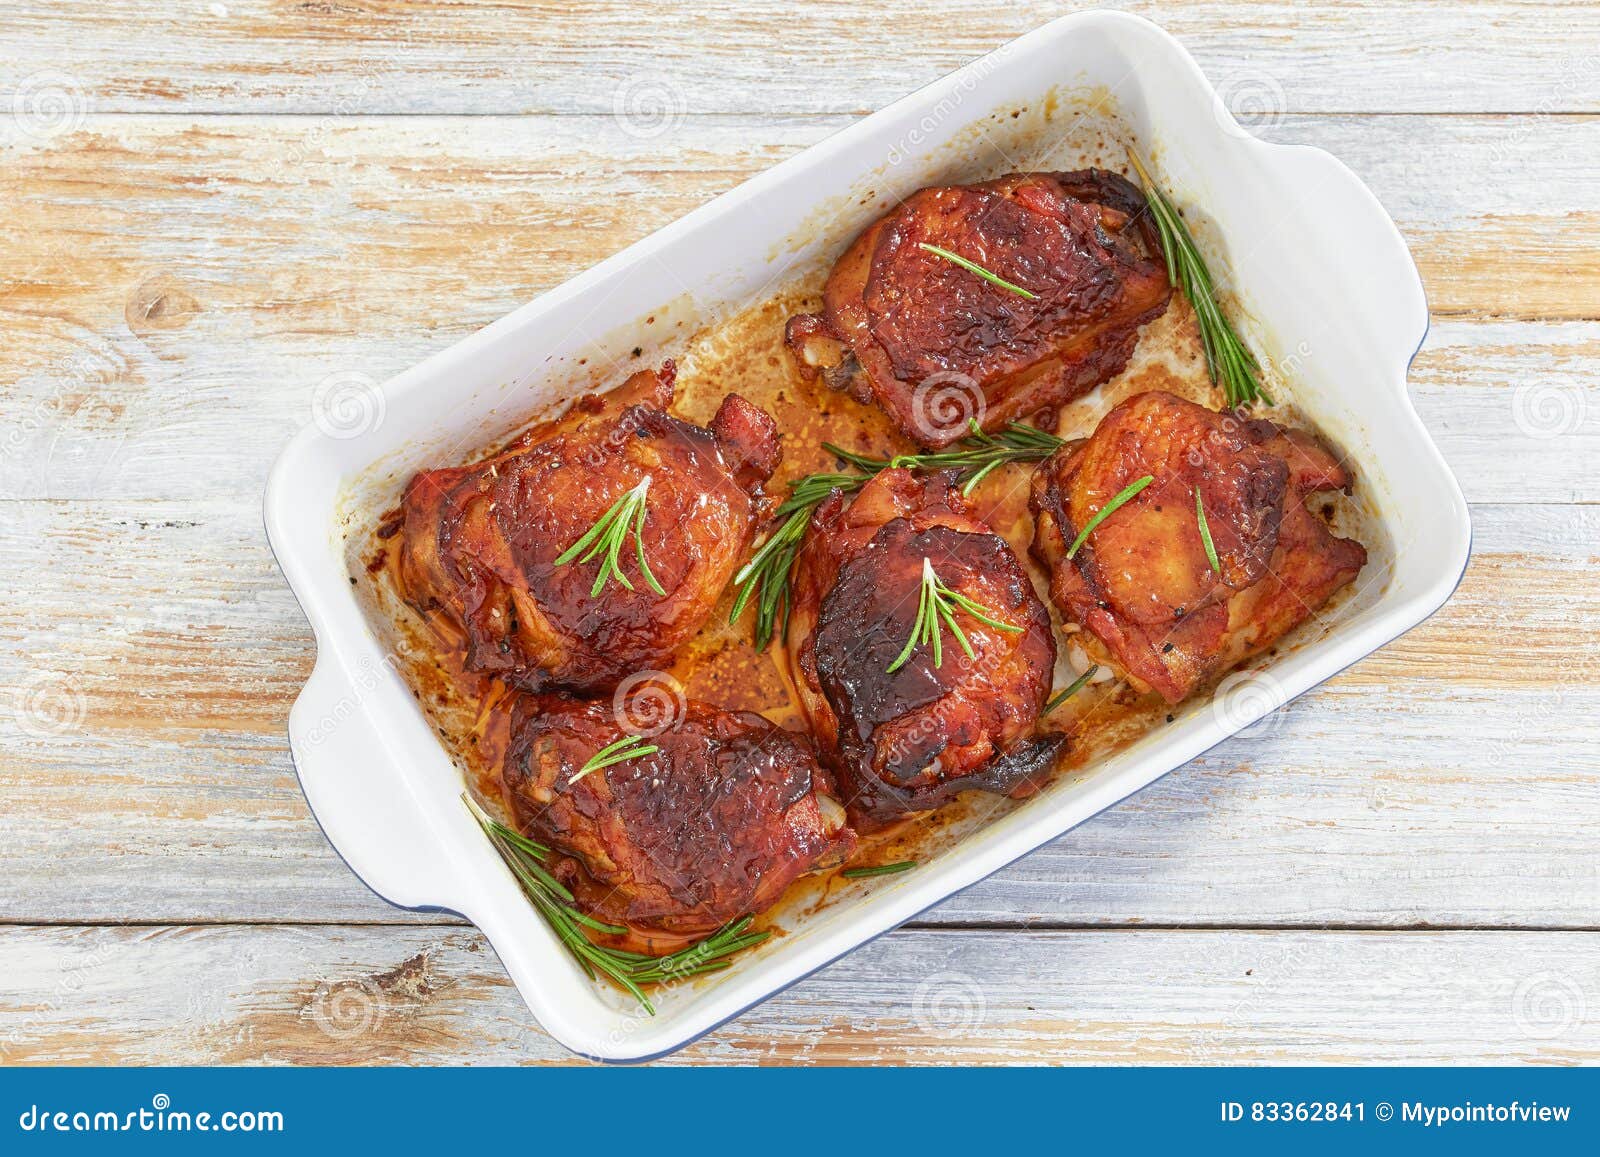 delicious chicken thigh roasted in rectangular baking dish